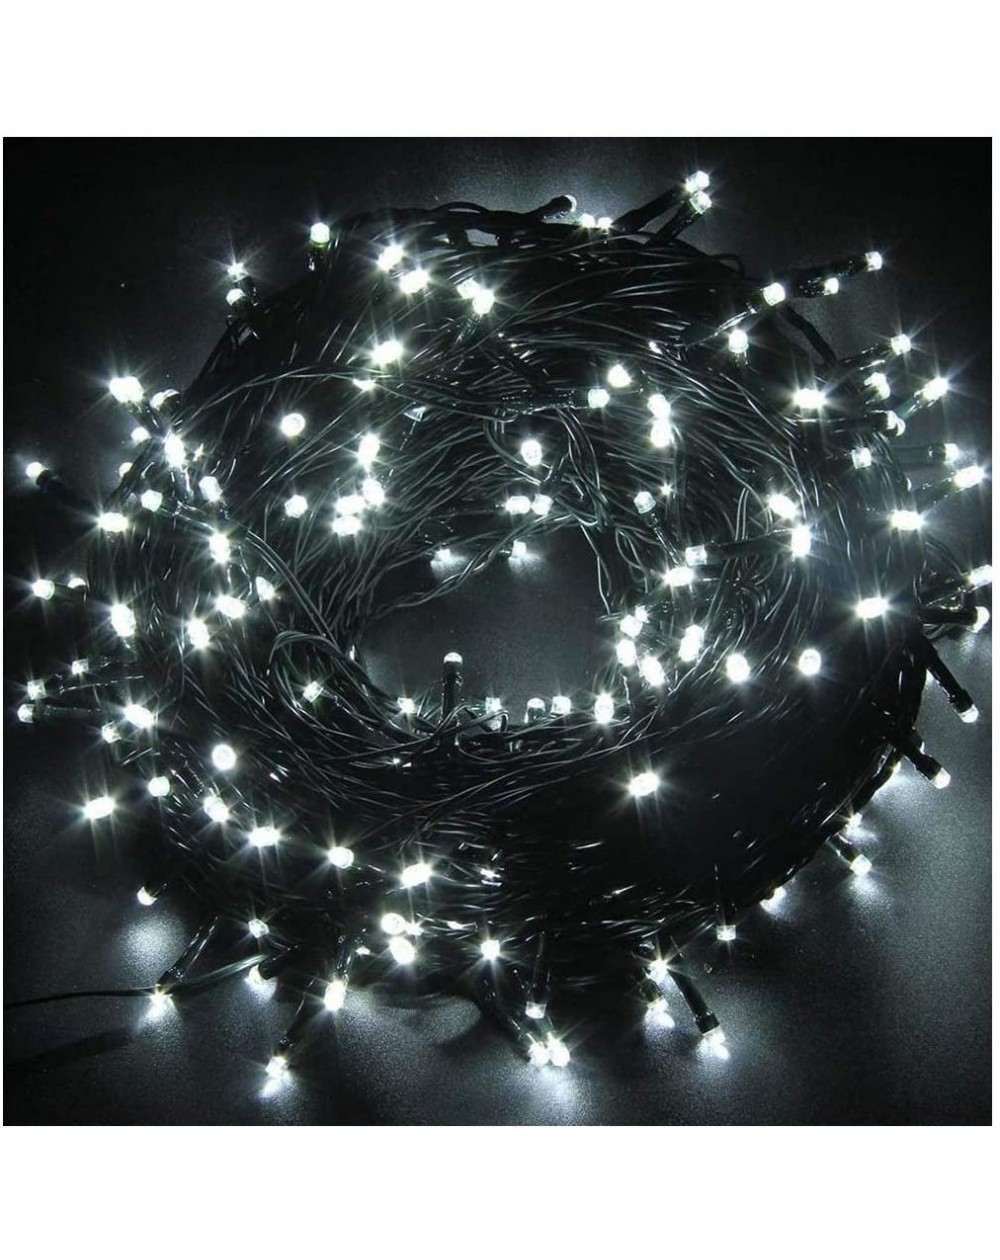 Indoor String Lights Christmas Lights- Indoor String Lights with 8 Flash Changing Modes- USB Power 72ft 200LED Wire Lights- W...